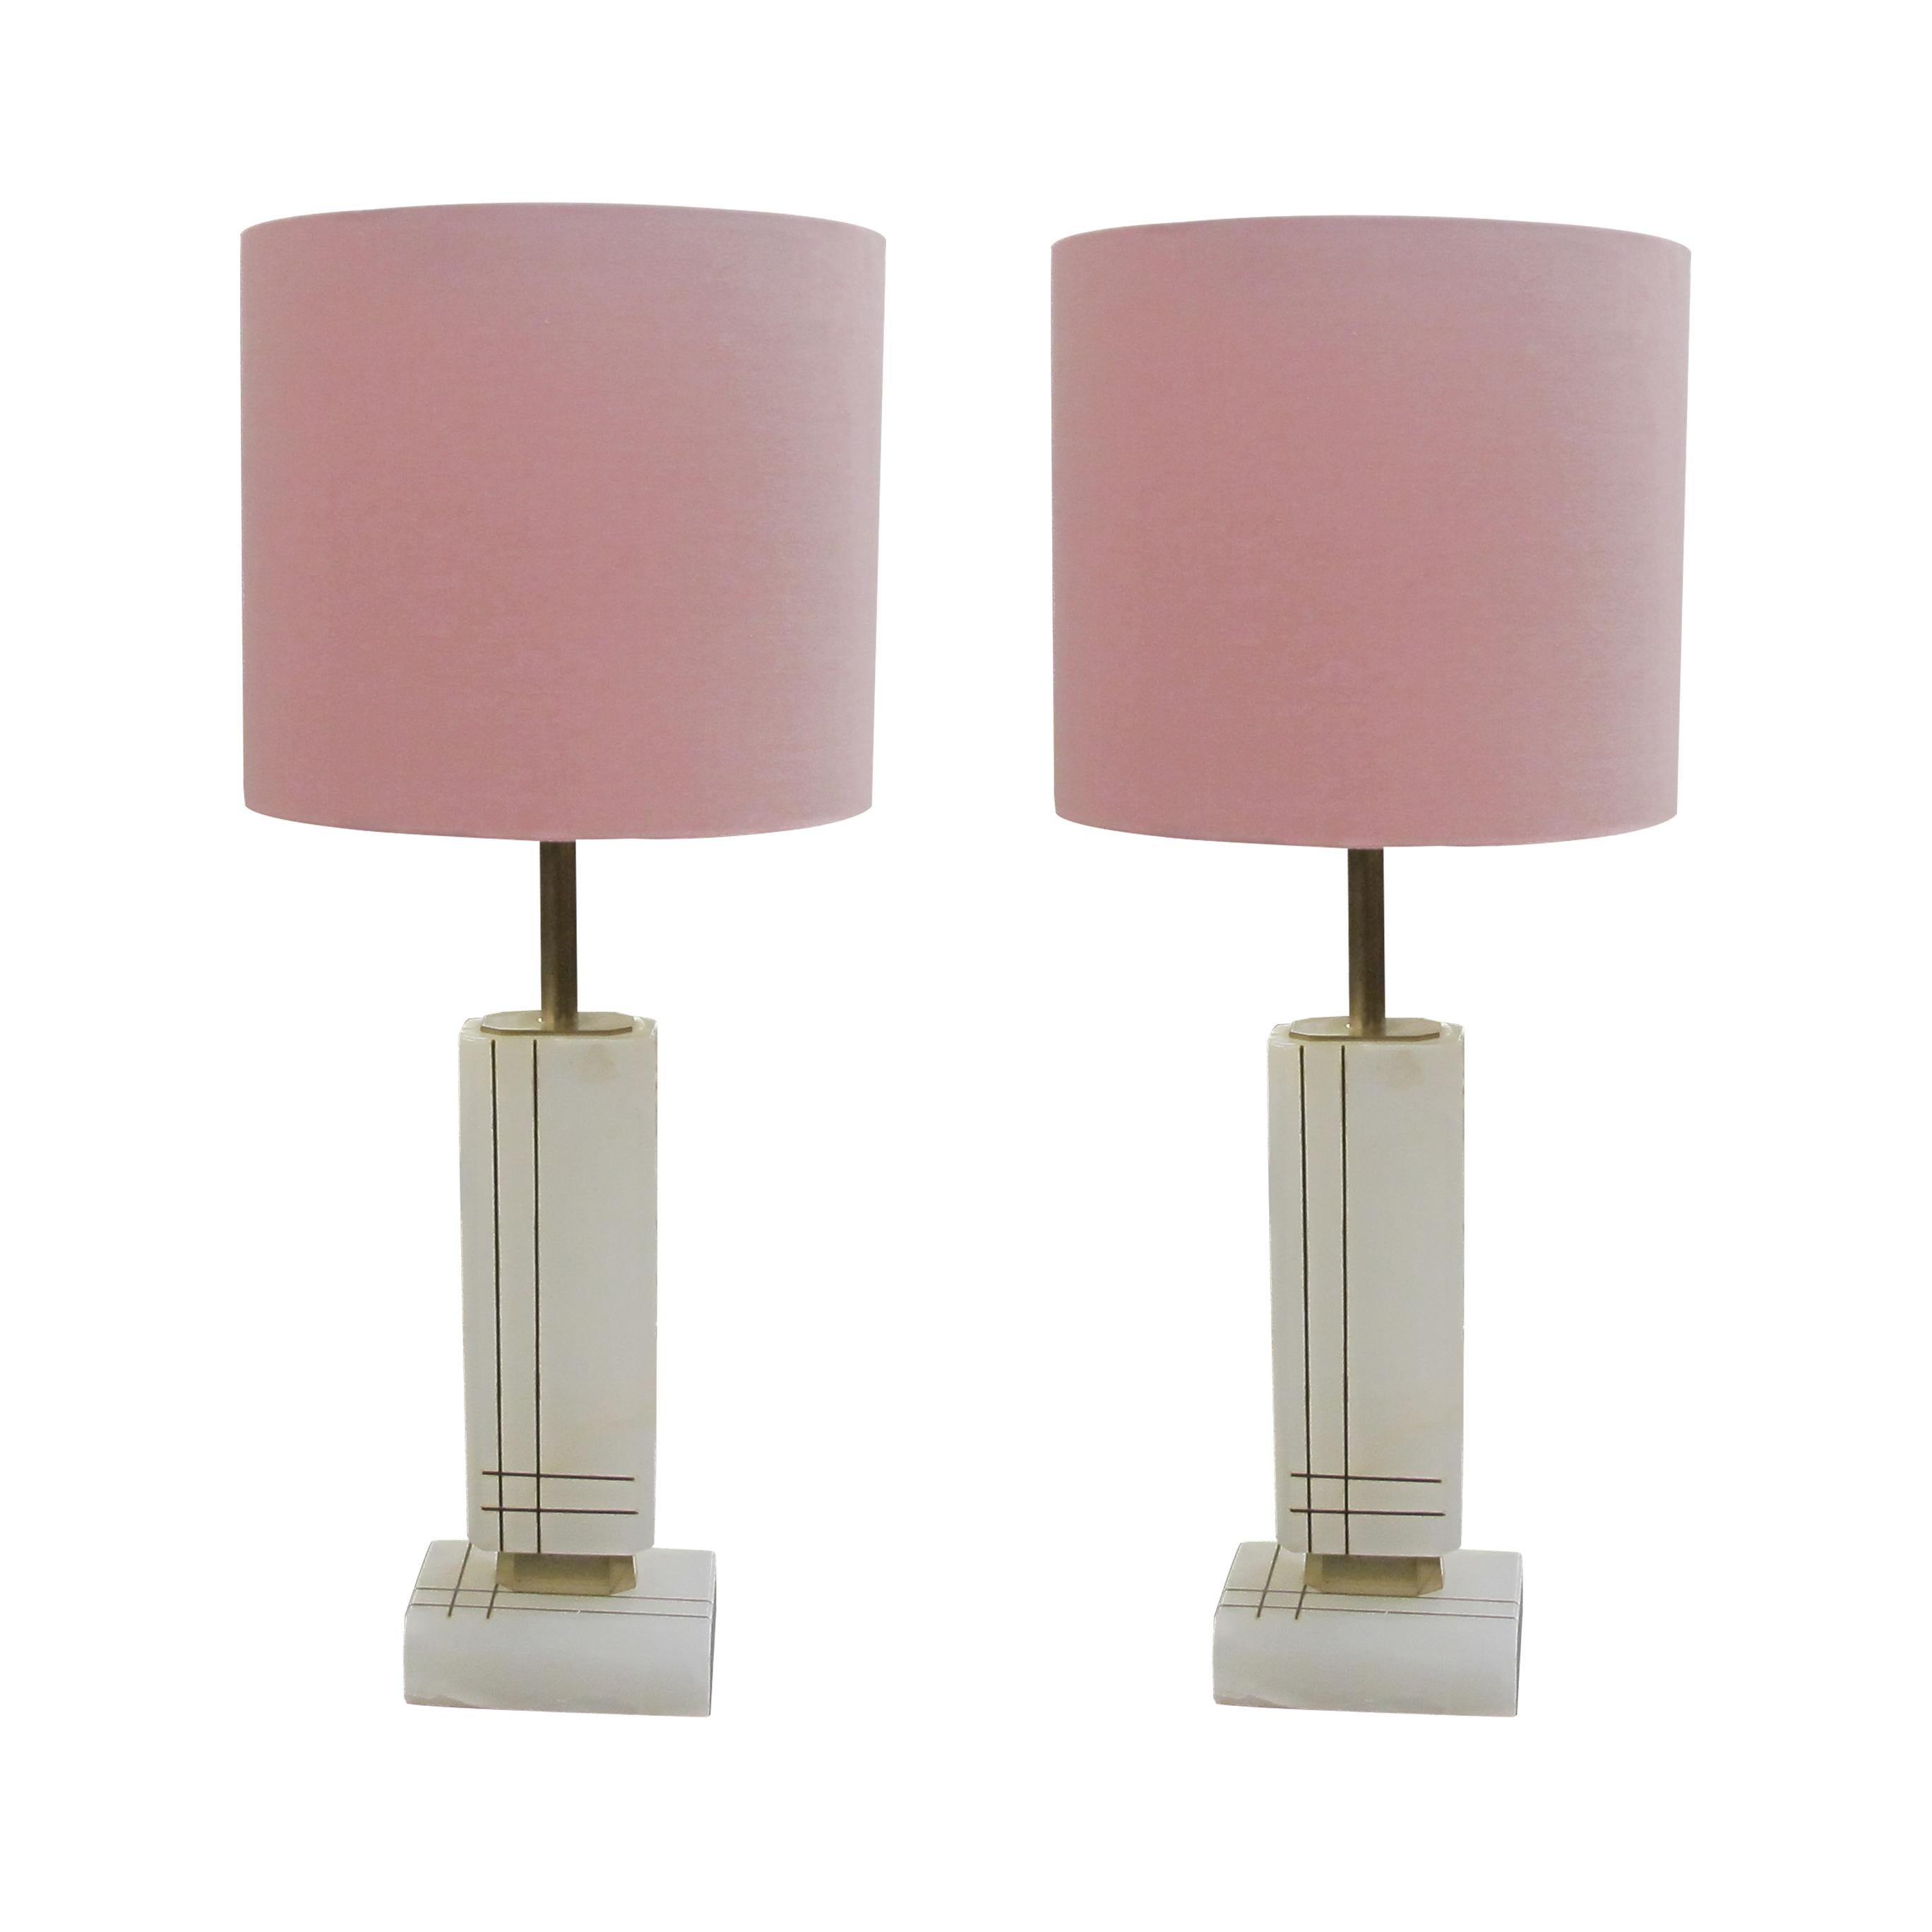 Elegant pair of table lamps, crafted from white onyx with smooth surfaces and embellished with gold engraved straight lines. The natural variations in the onyx add depth and character, making each piece truly unique. The edges of the onyx have been